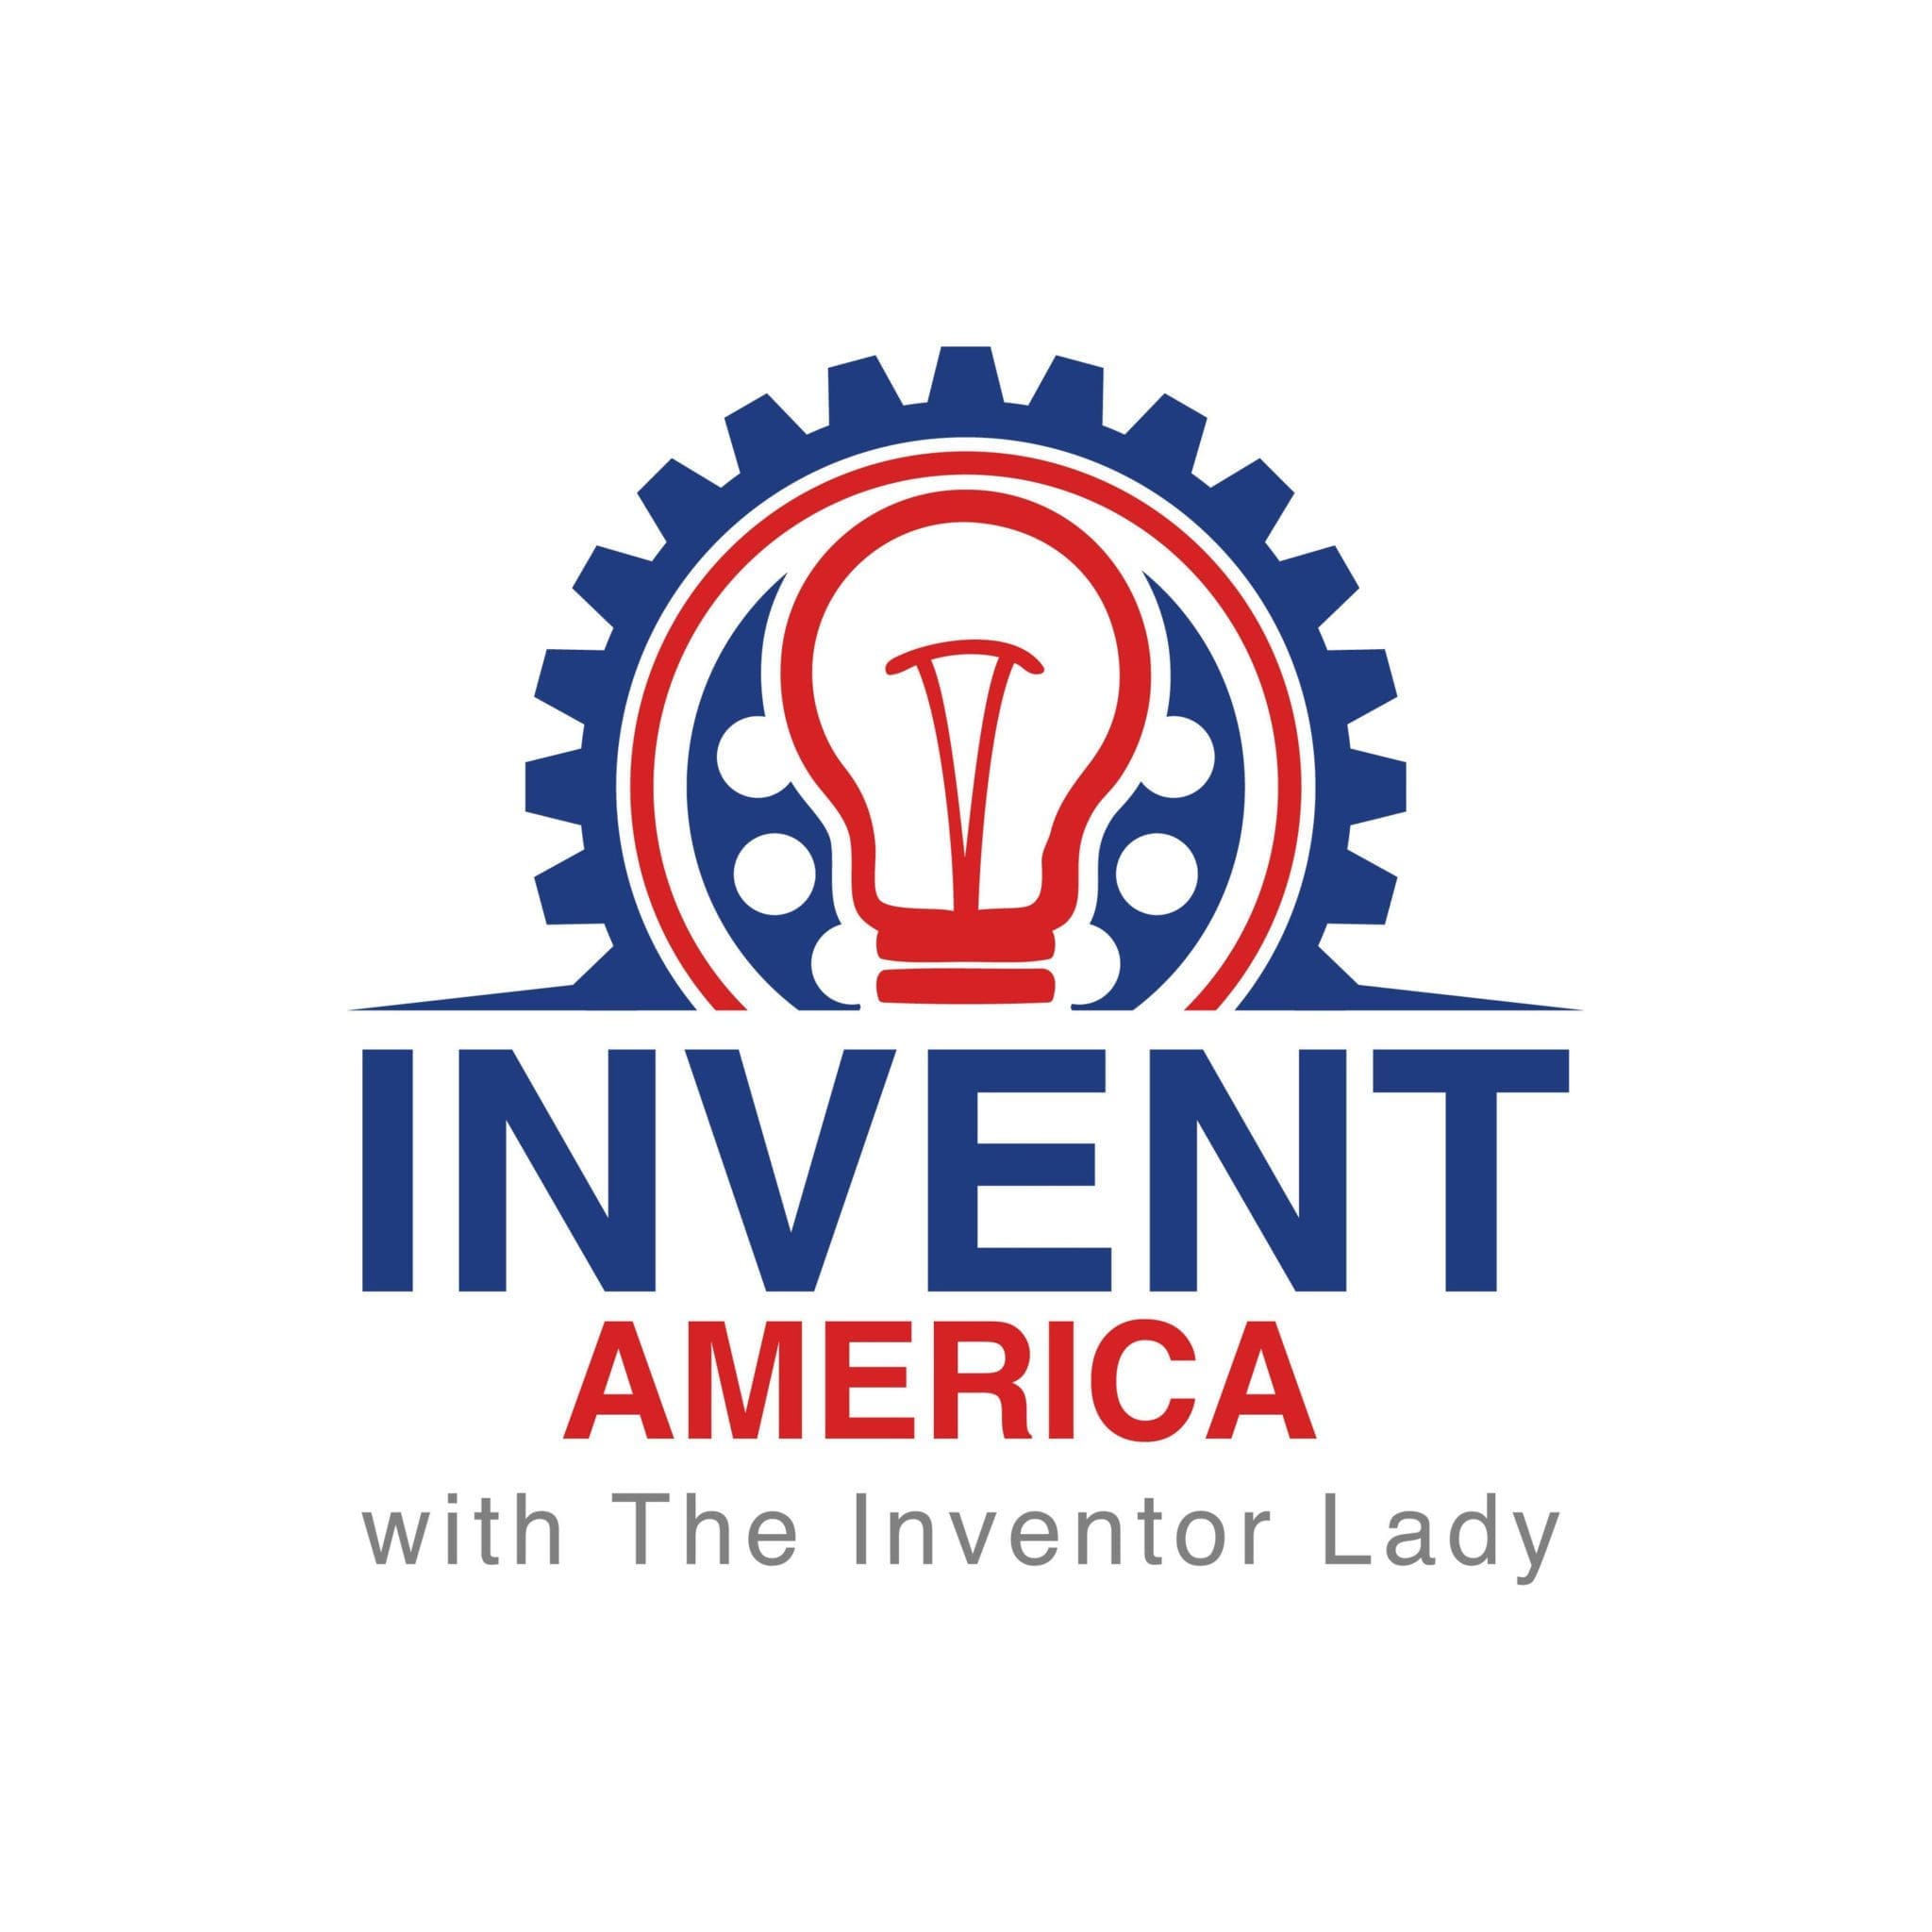 Success At Tradeshows – Inventor Lady & Michael Miller